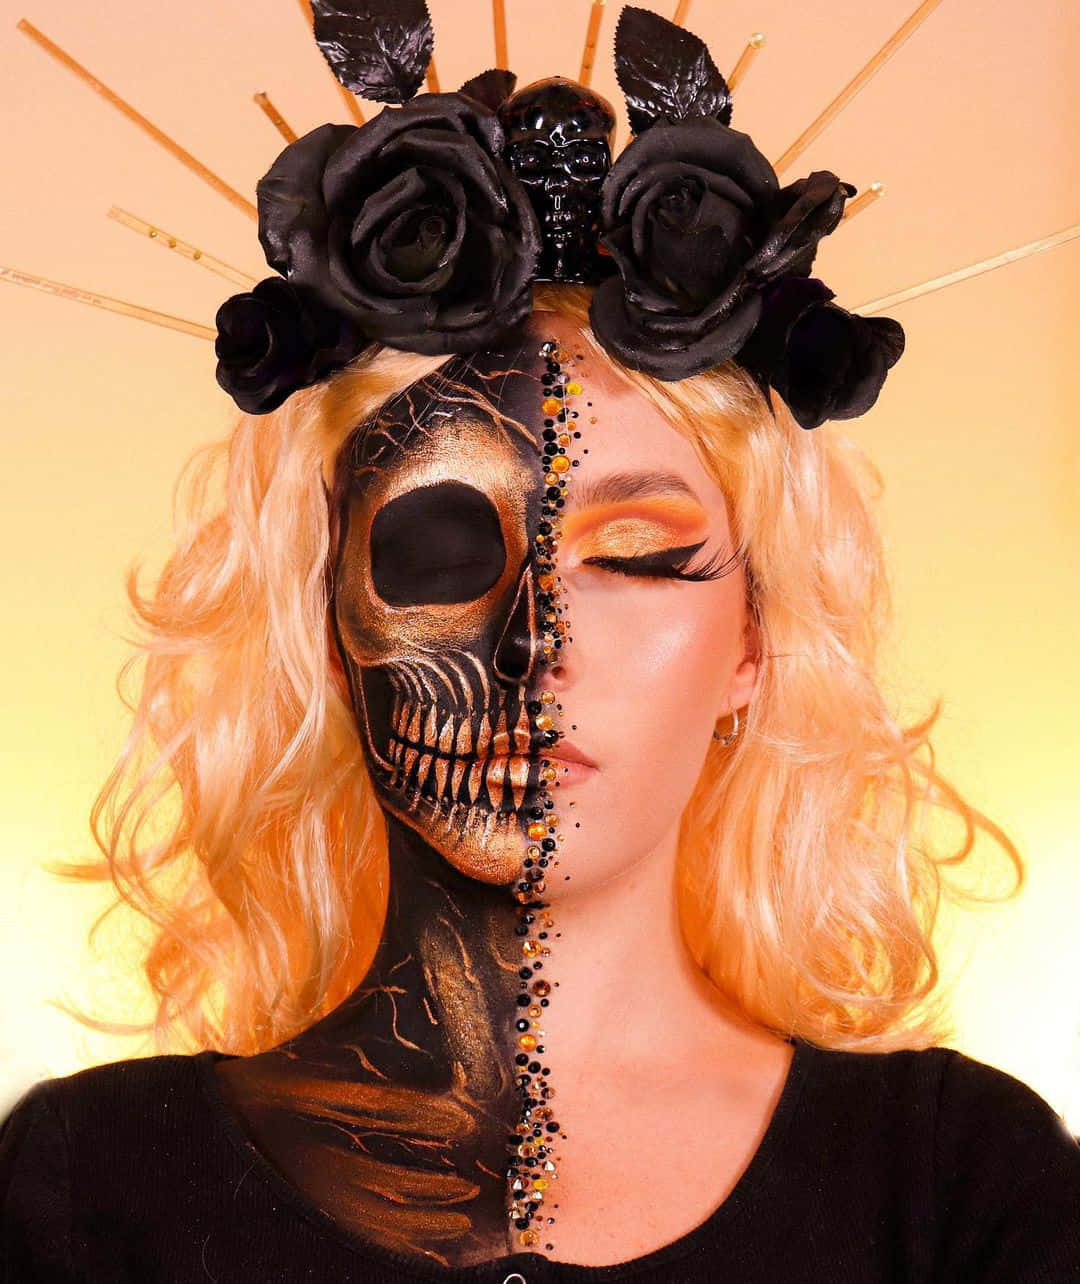 Get creative this Halloween with creative and creative makeup looks. Wallpaper